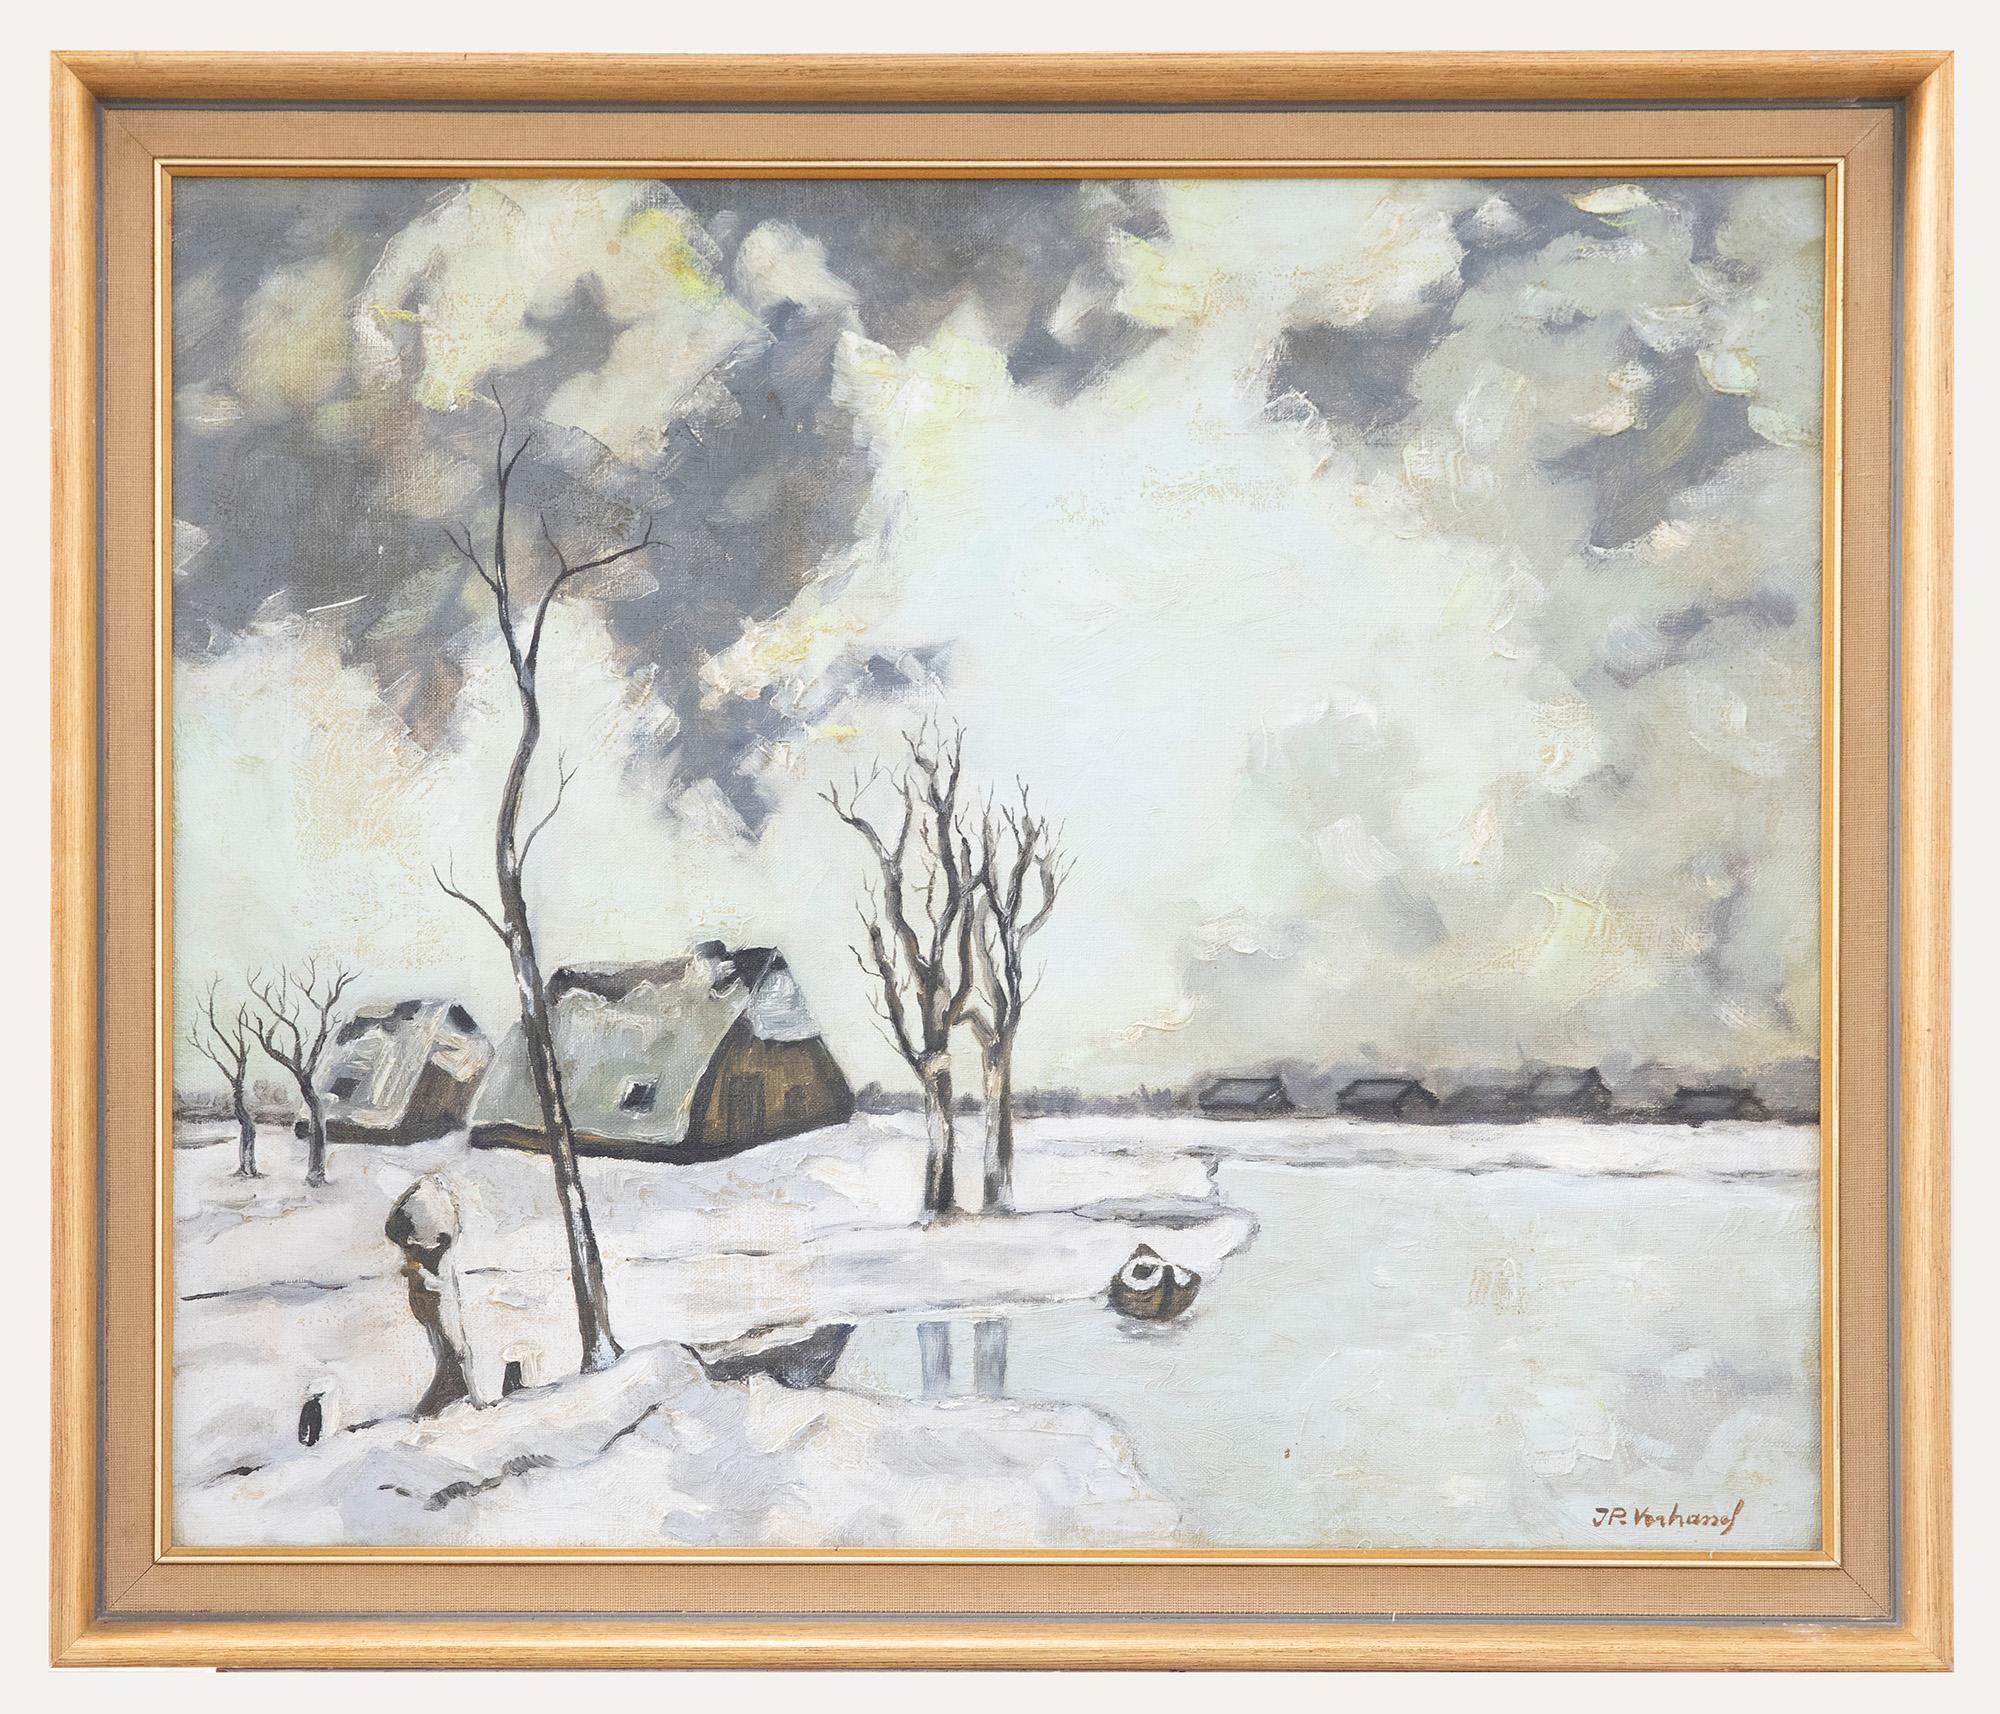 Unknown Landscape Painting - JP. Veahanef - Framed 20th Century Oil, Winter Landscape with Cottages